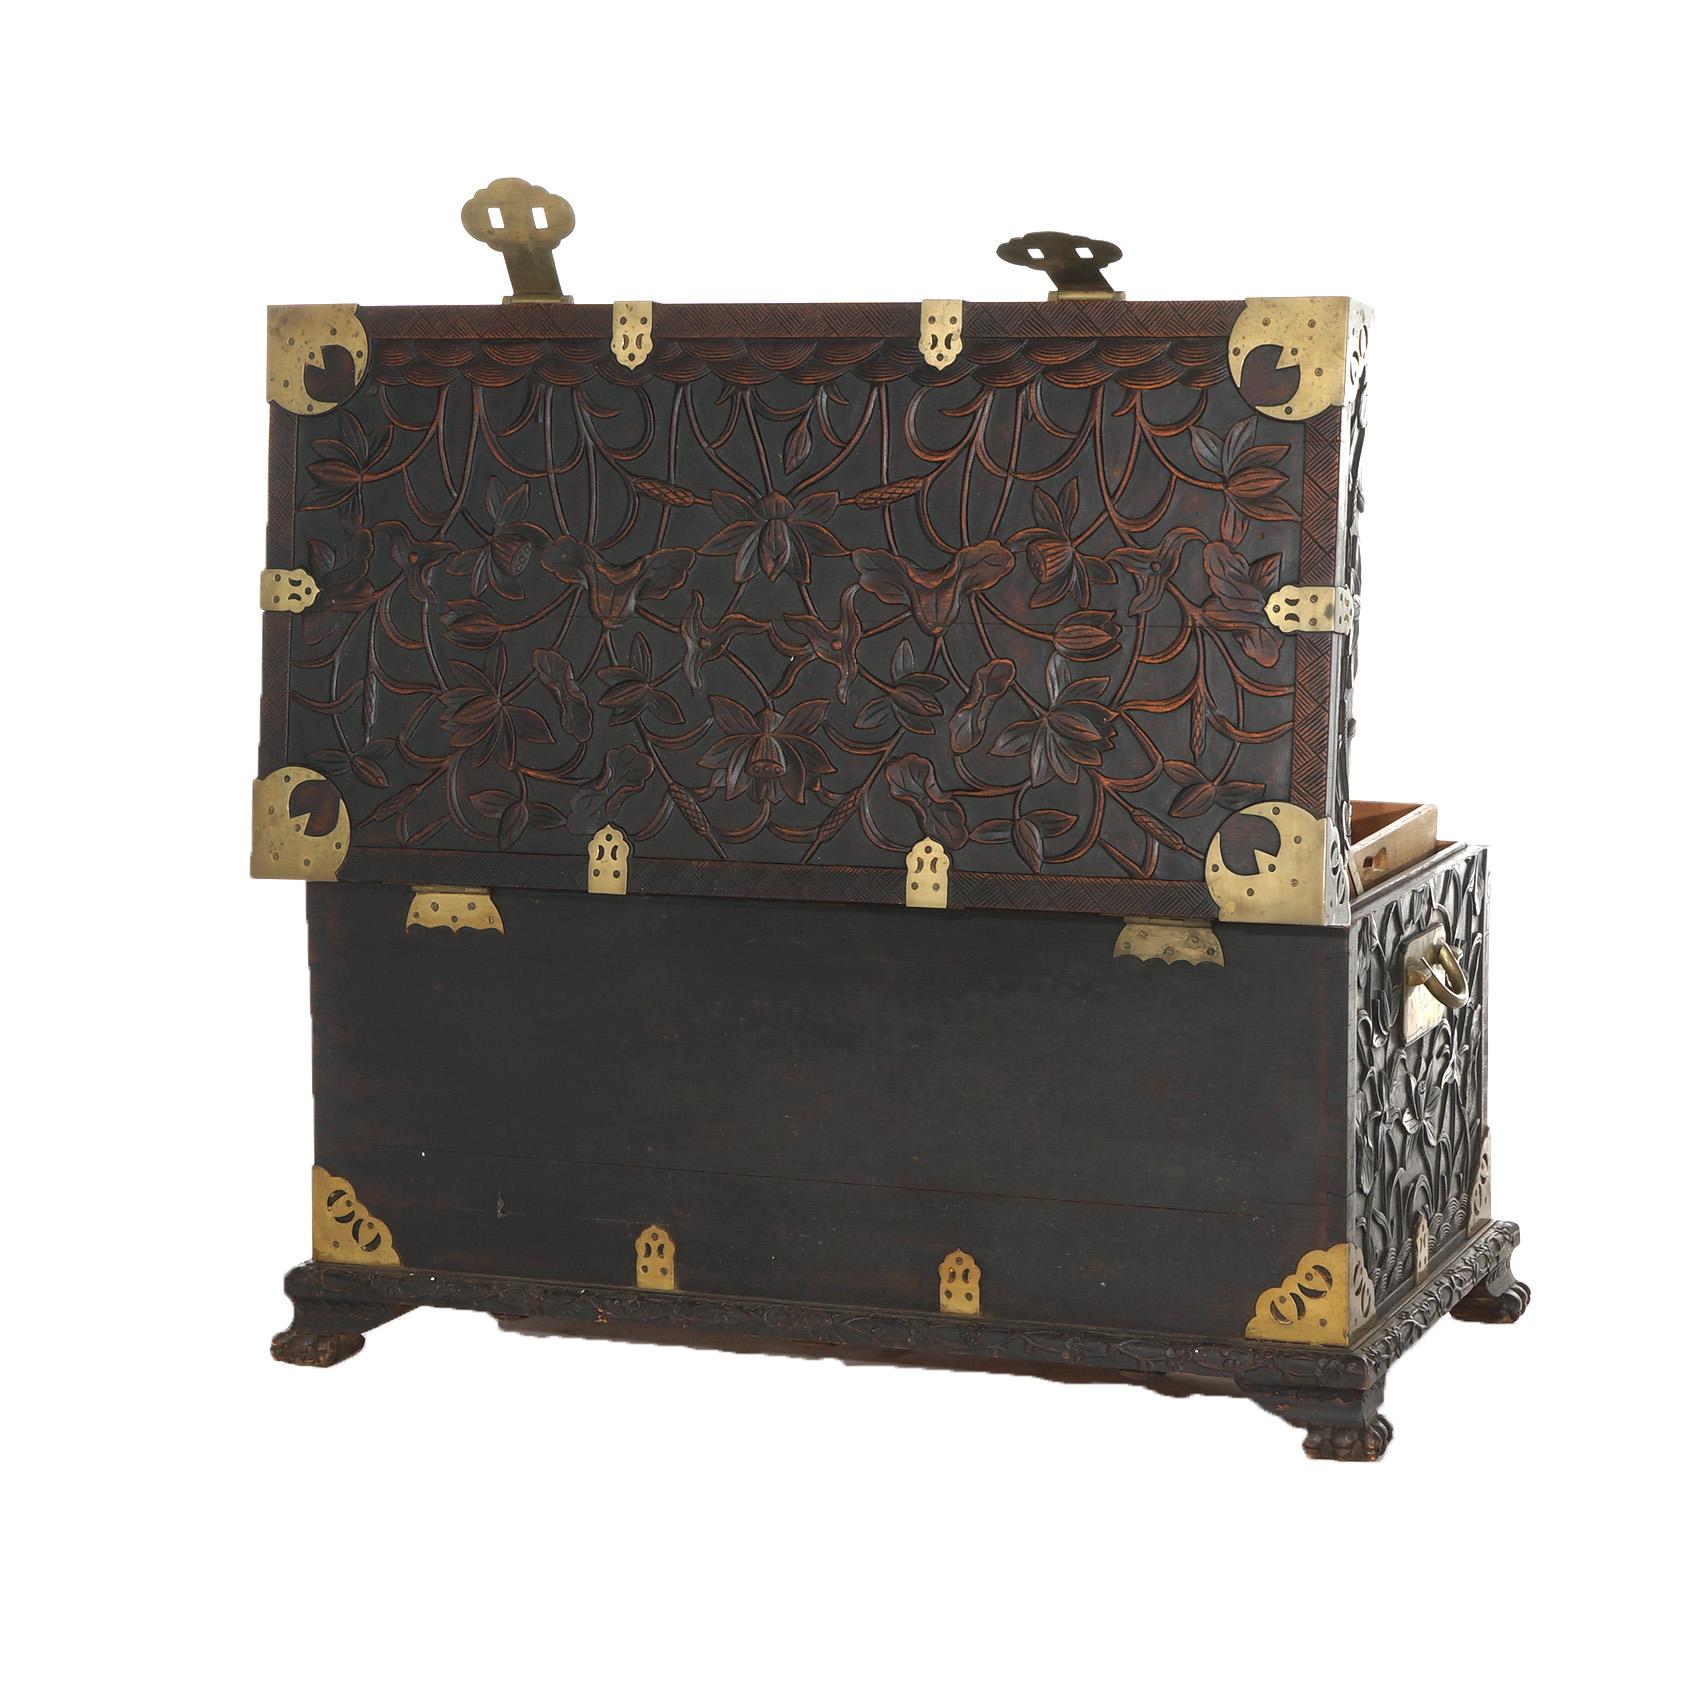 Antique Chinese Blanket Wedding Chest Carved in Relief with Floral Design C1890 For Sale 3